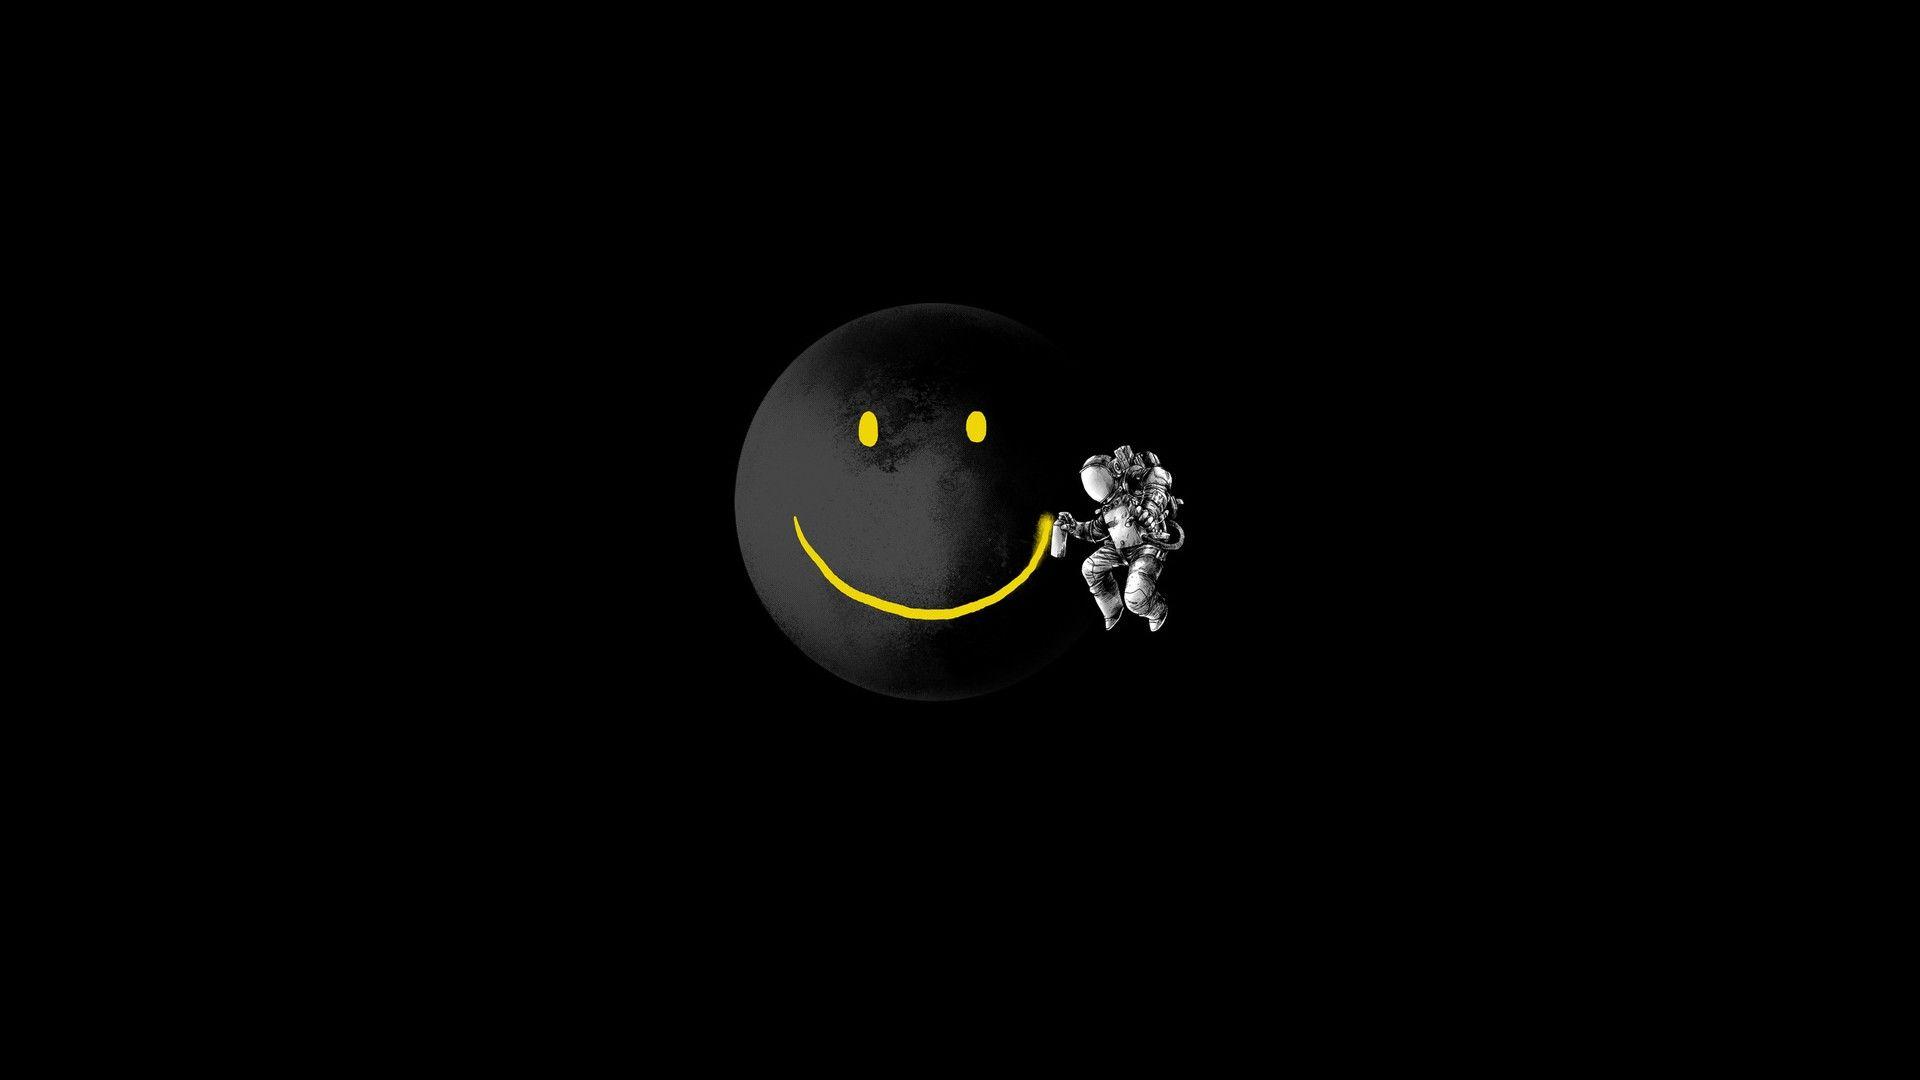 HD HD Smiley Face Wallpaper, Live Smiley Face Wallpaper (DDWP)